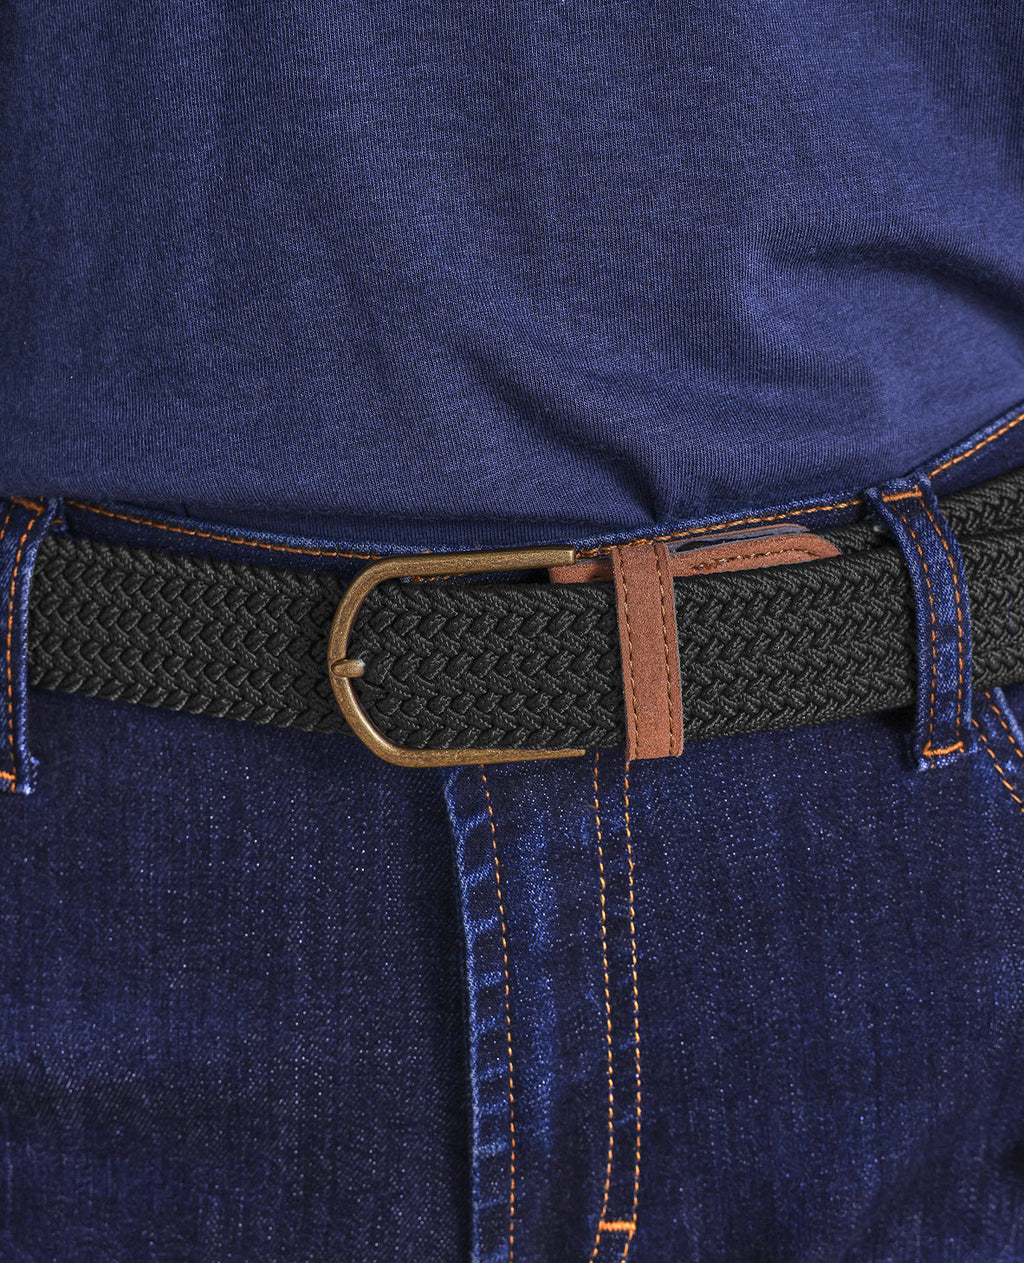 The Voyager - Woven Stretch Belt w/Suede Trim - Black